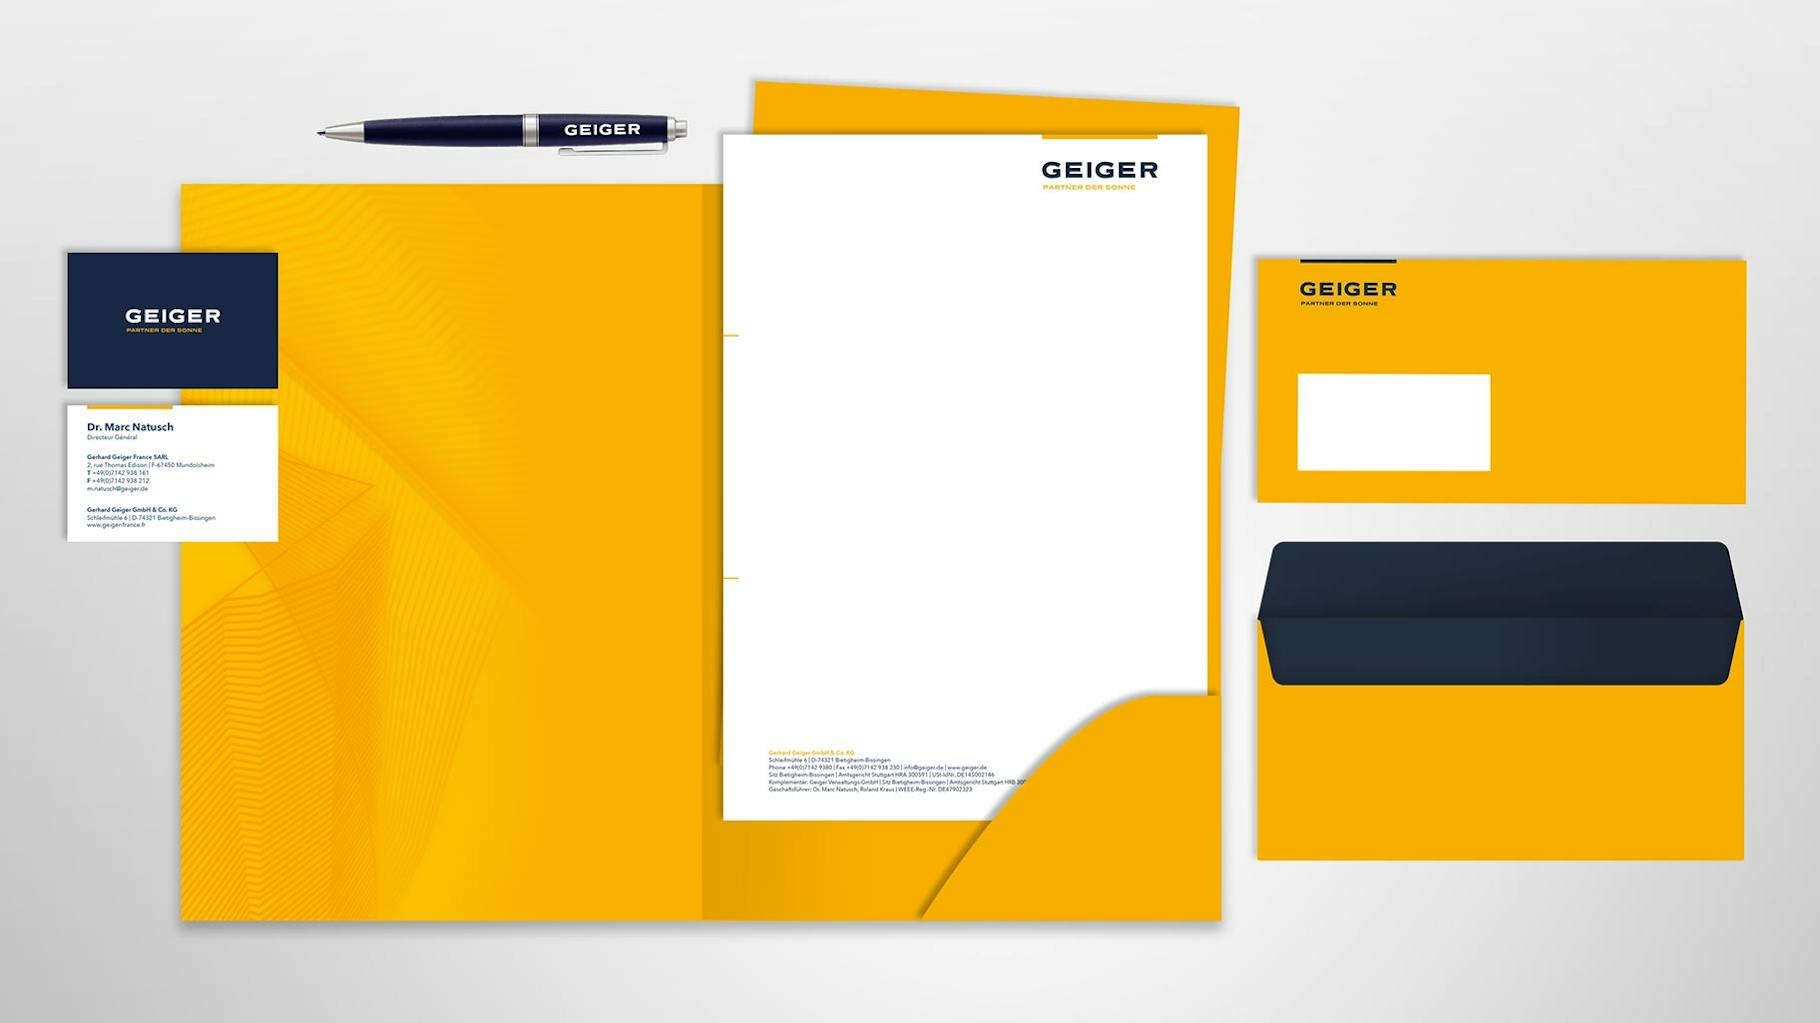 The Geiger business stationery